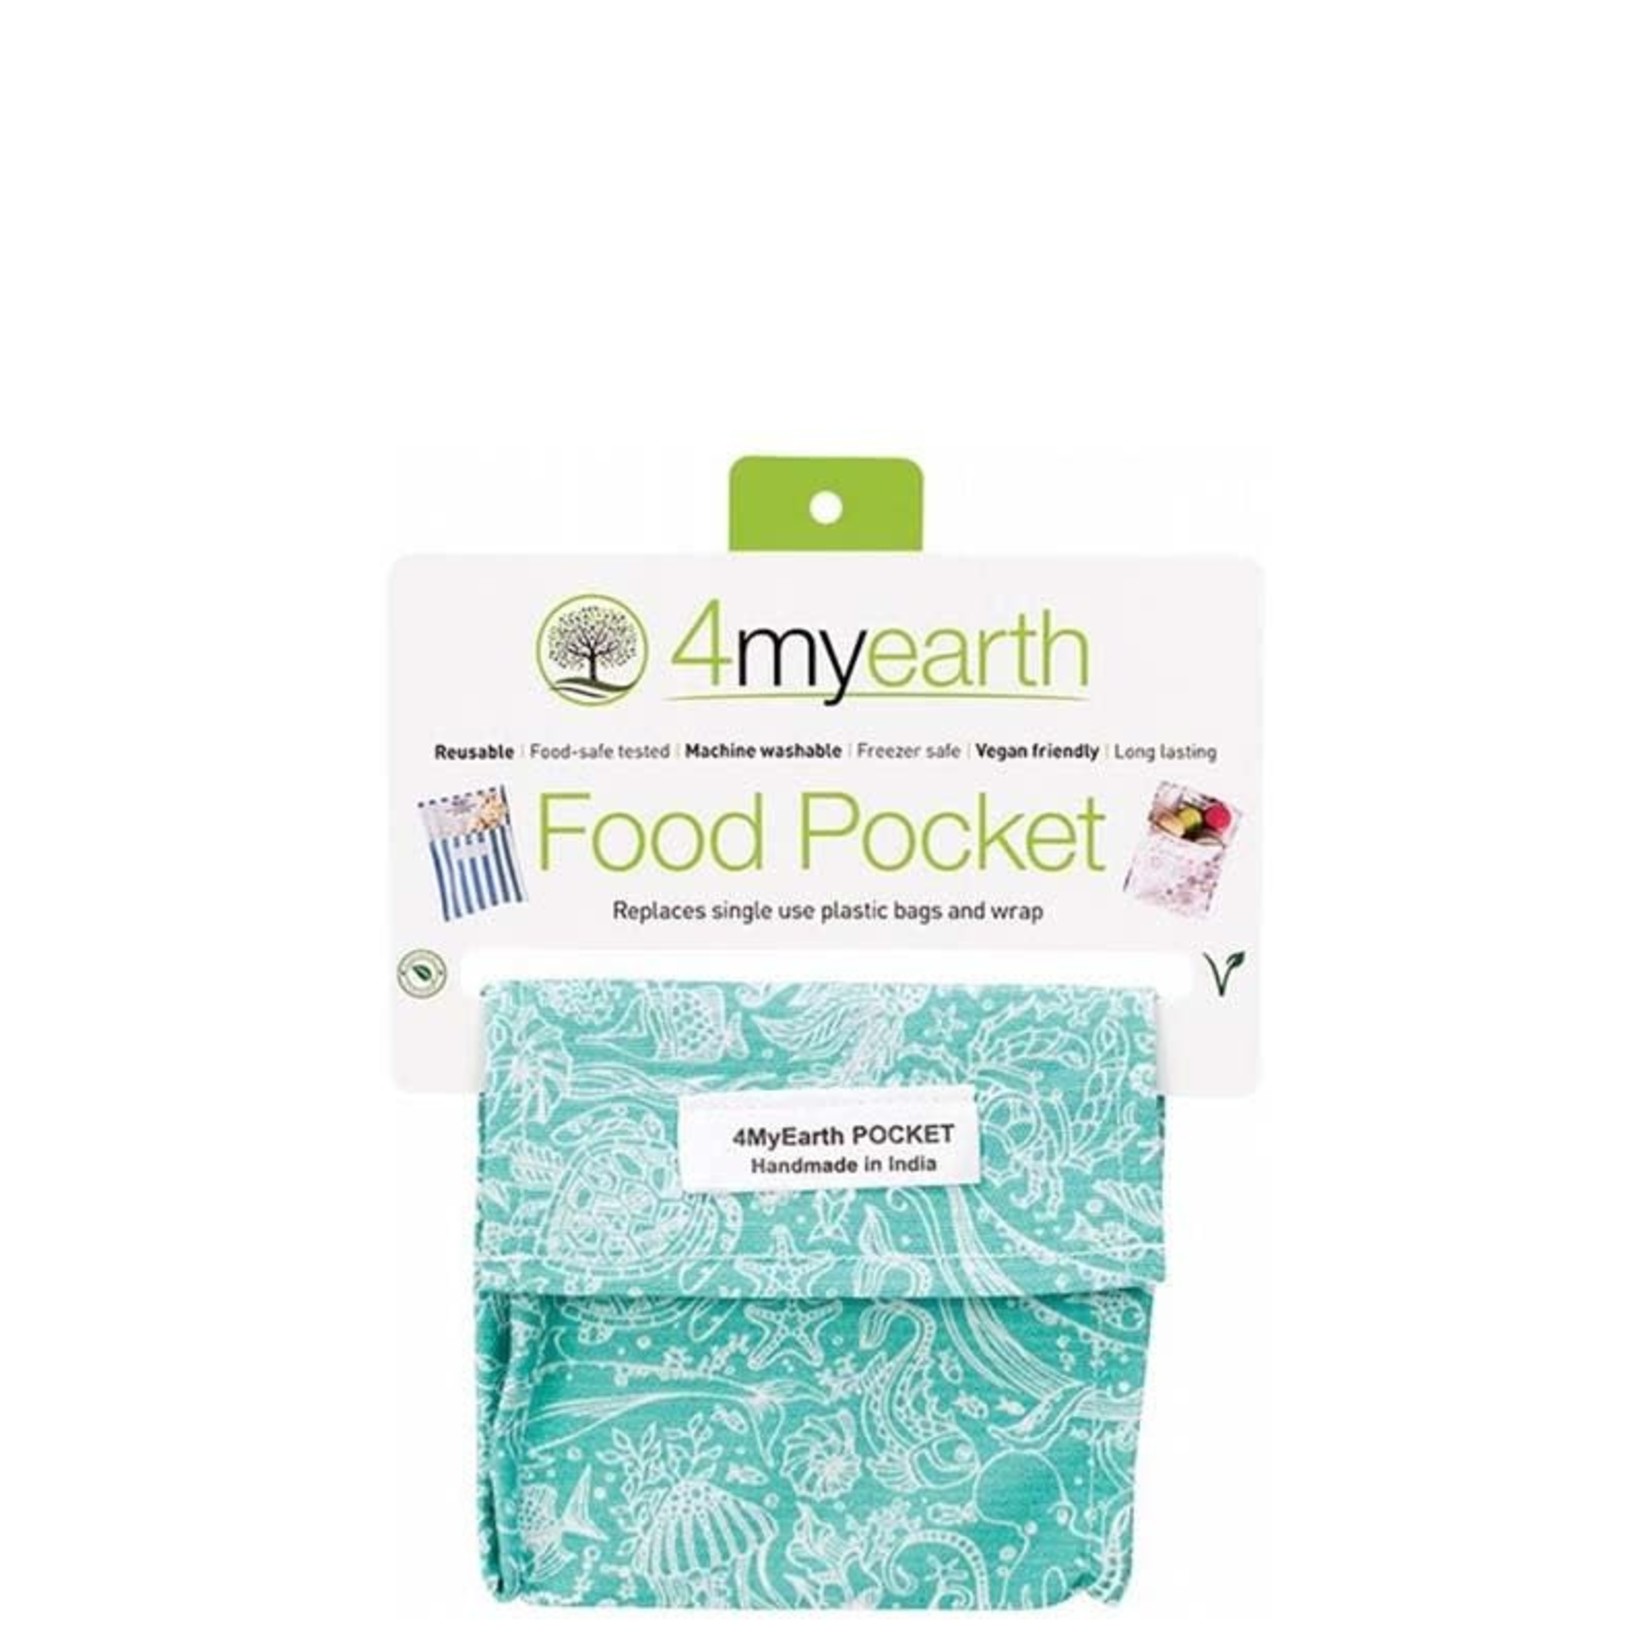 4MyEarth Snack & Food Pocket